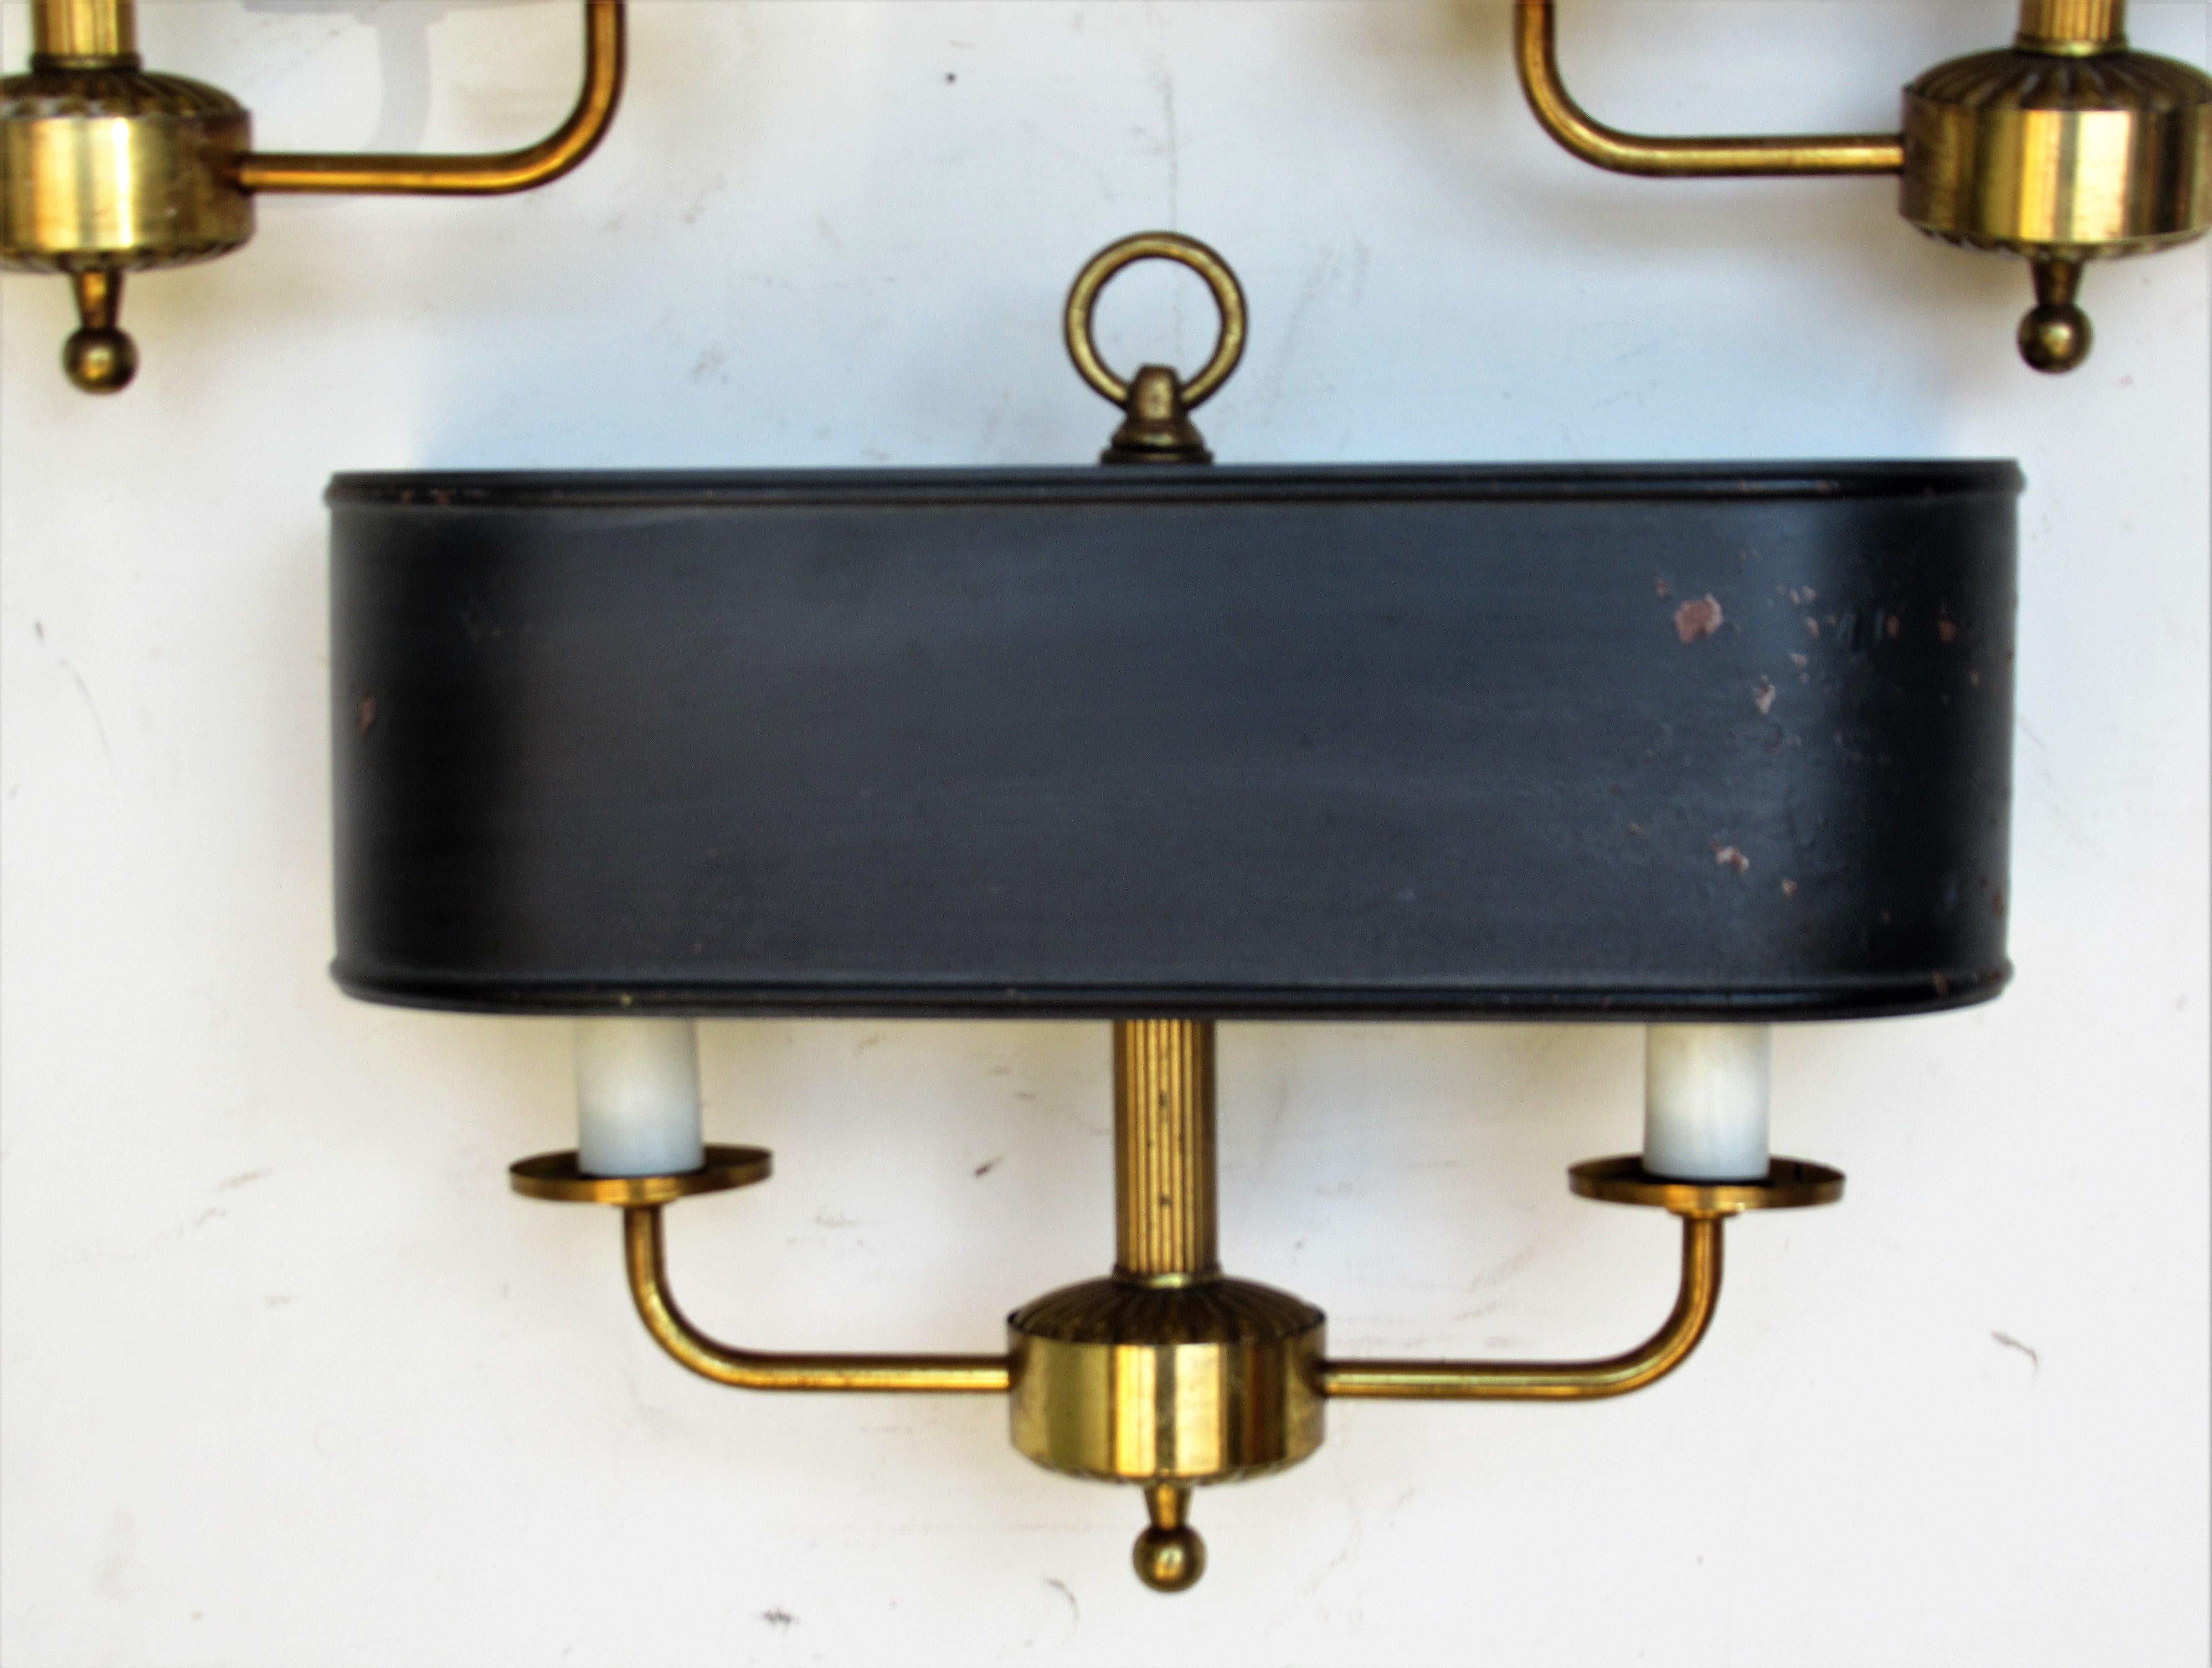 Matched set of high style Hollywood Regency Bouillotte type brass wall light sconces with exterior black and interior pale gray painted metal shades - circa 1940-1960. All original vintage as found. Look at all pictures and read condition report in